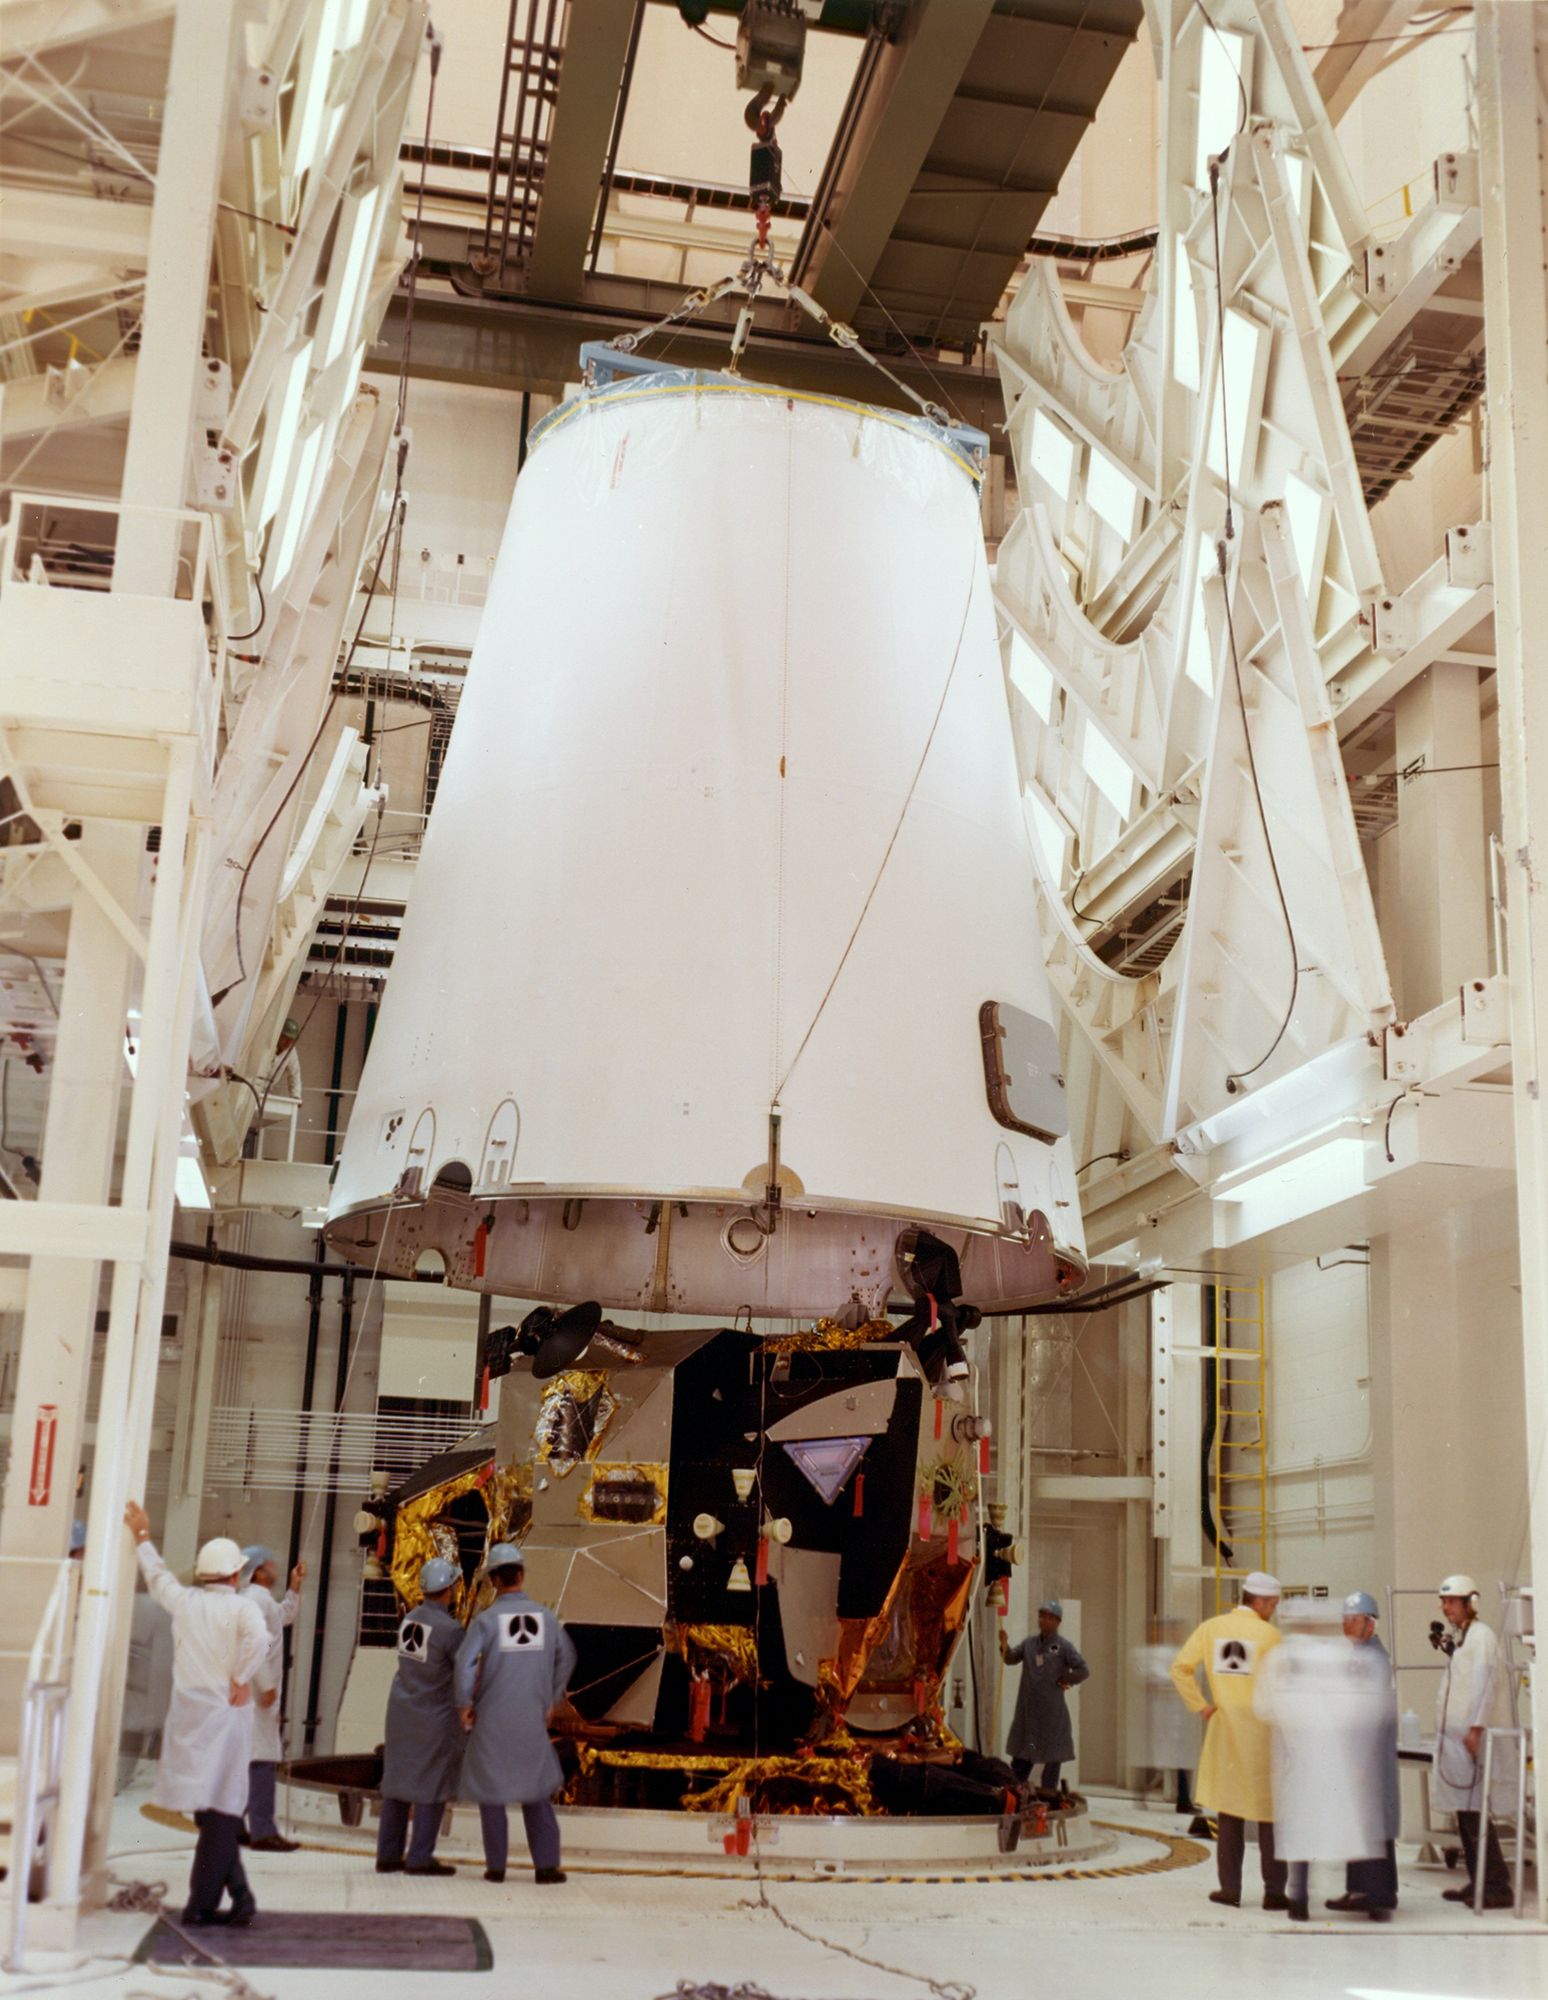 third-stage-adapter-is-lowered-into-place-over-the-lunar-module.jpg